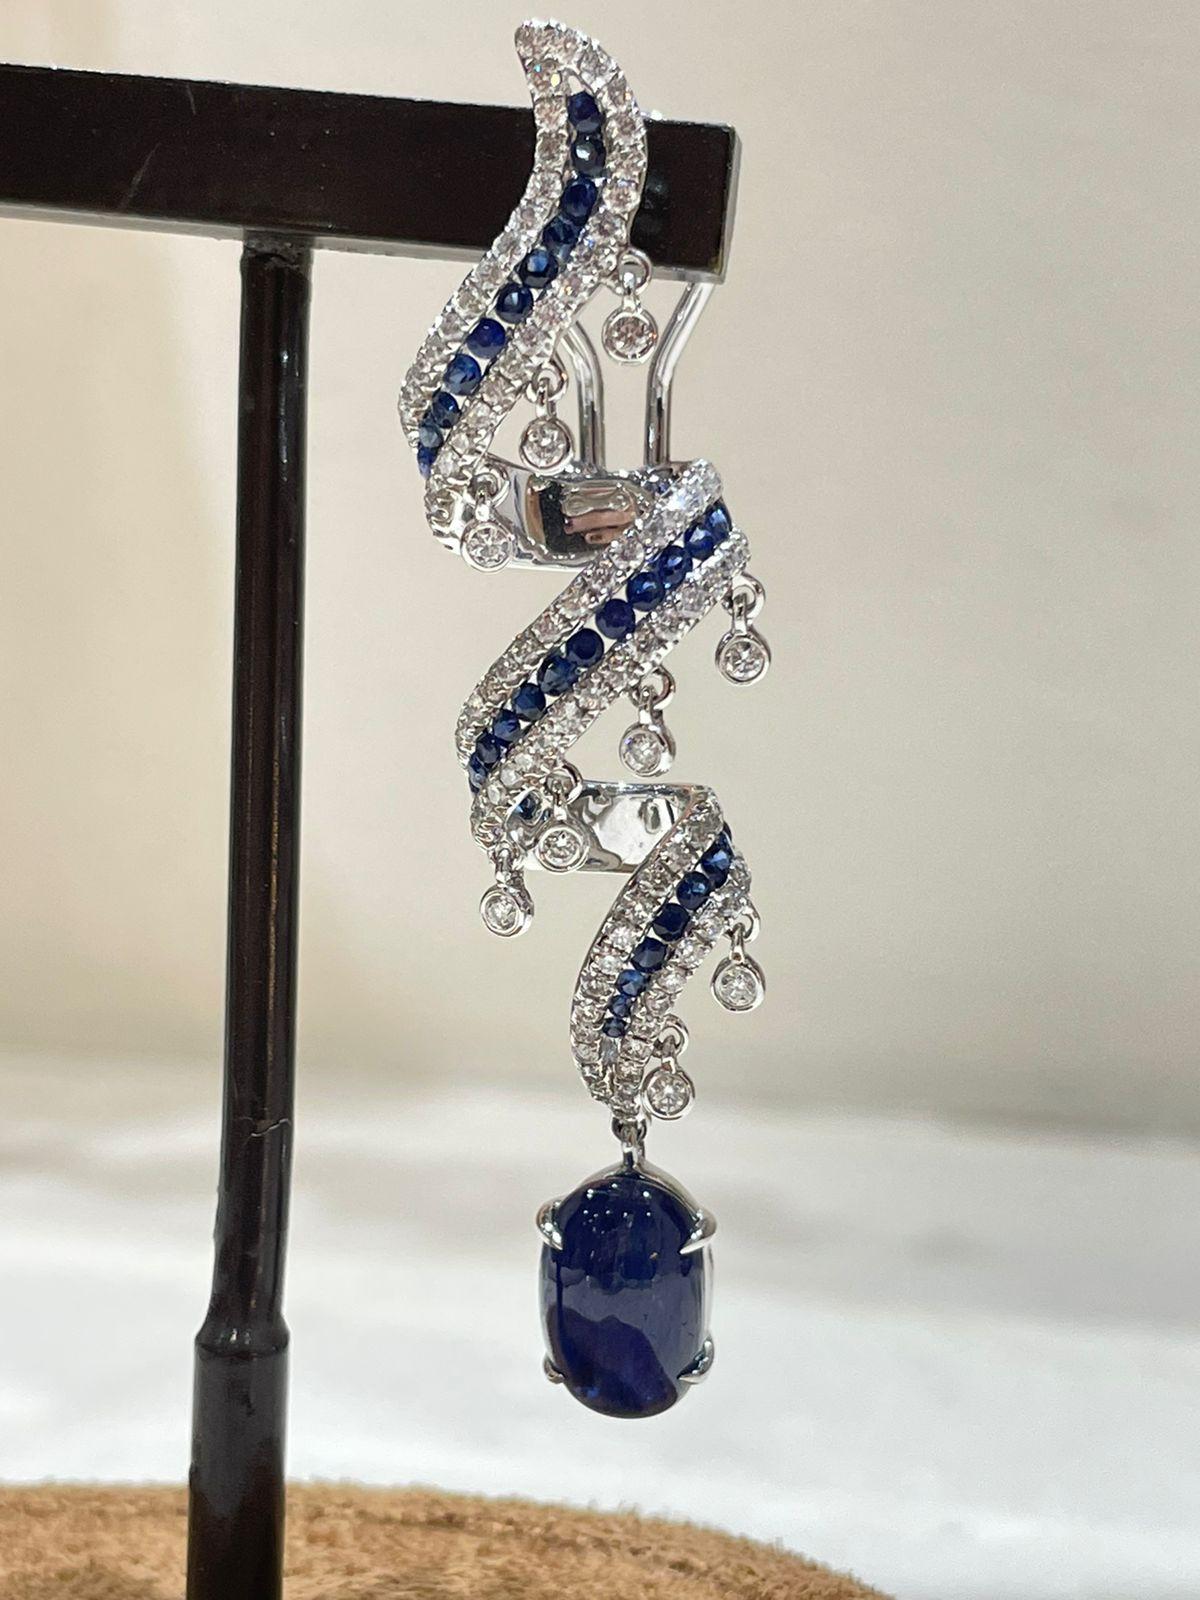 These dangling earrings exude sophistication and elegance with a perfect balance of simplicity and opulence. A striking blue sapphire takes the stage adorned with exquisitely round-cut diamonds. The design ensures a reflection of light and glamour